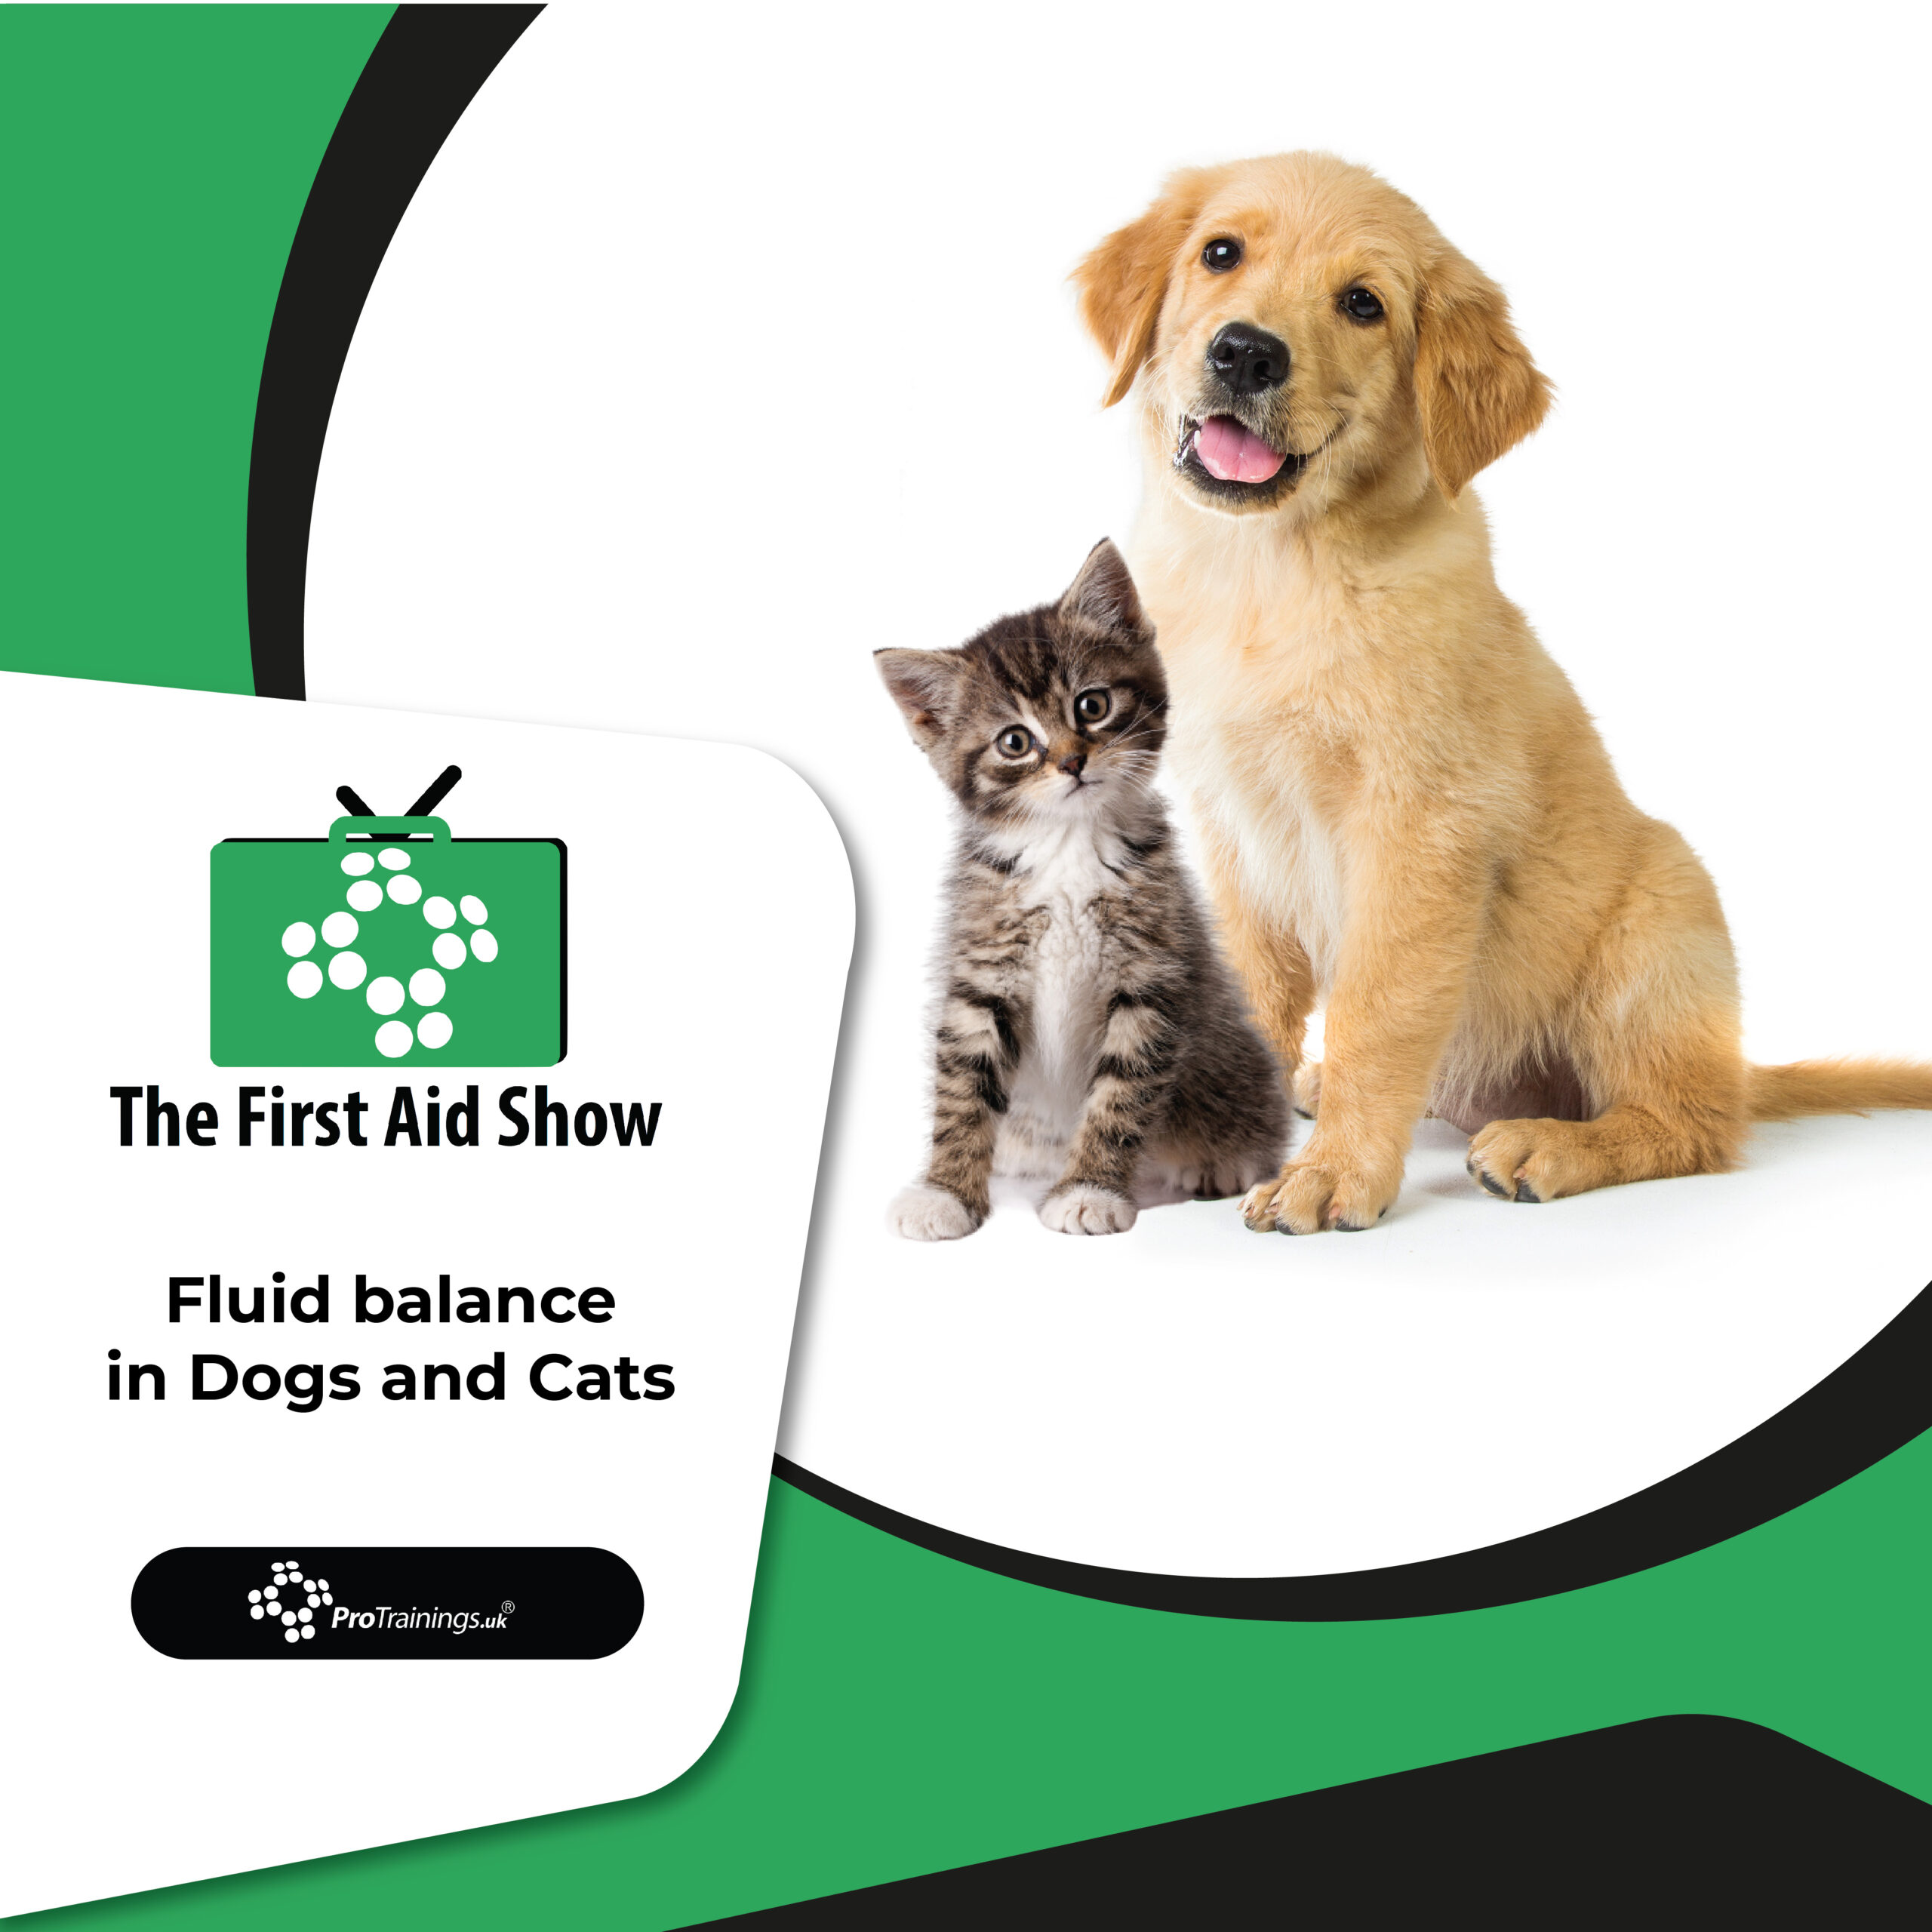 Fluid balance in Dogs and Cats